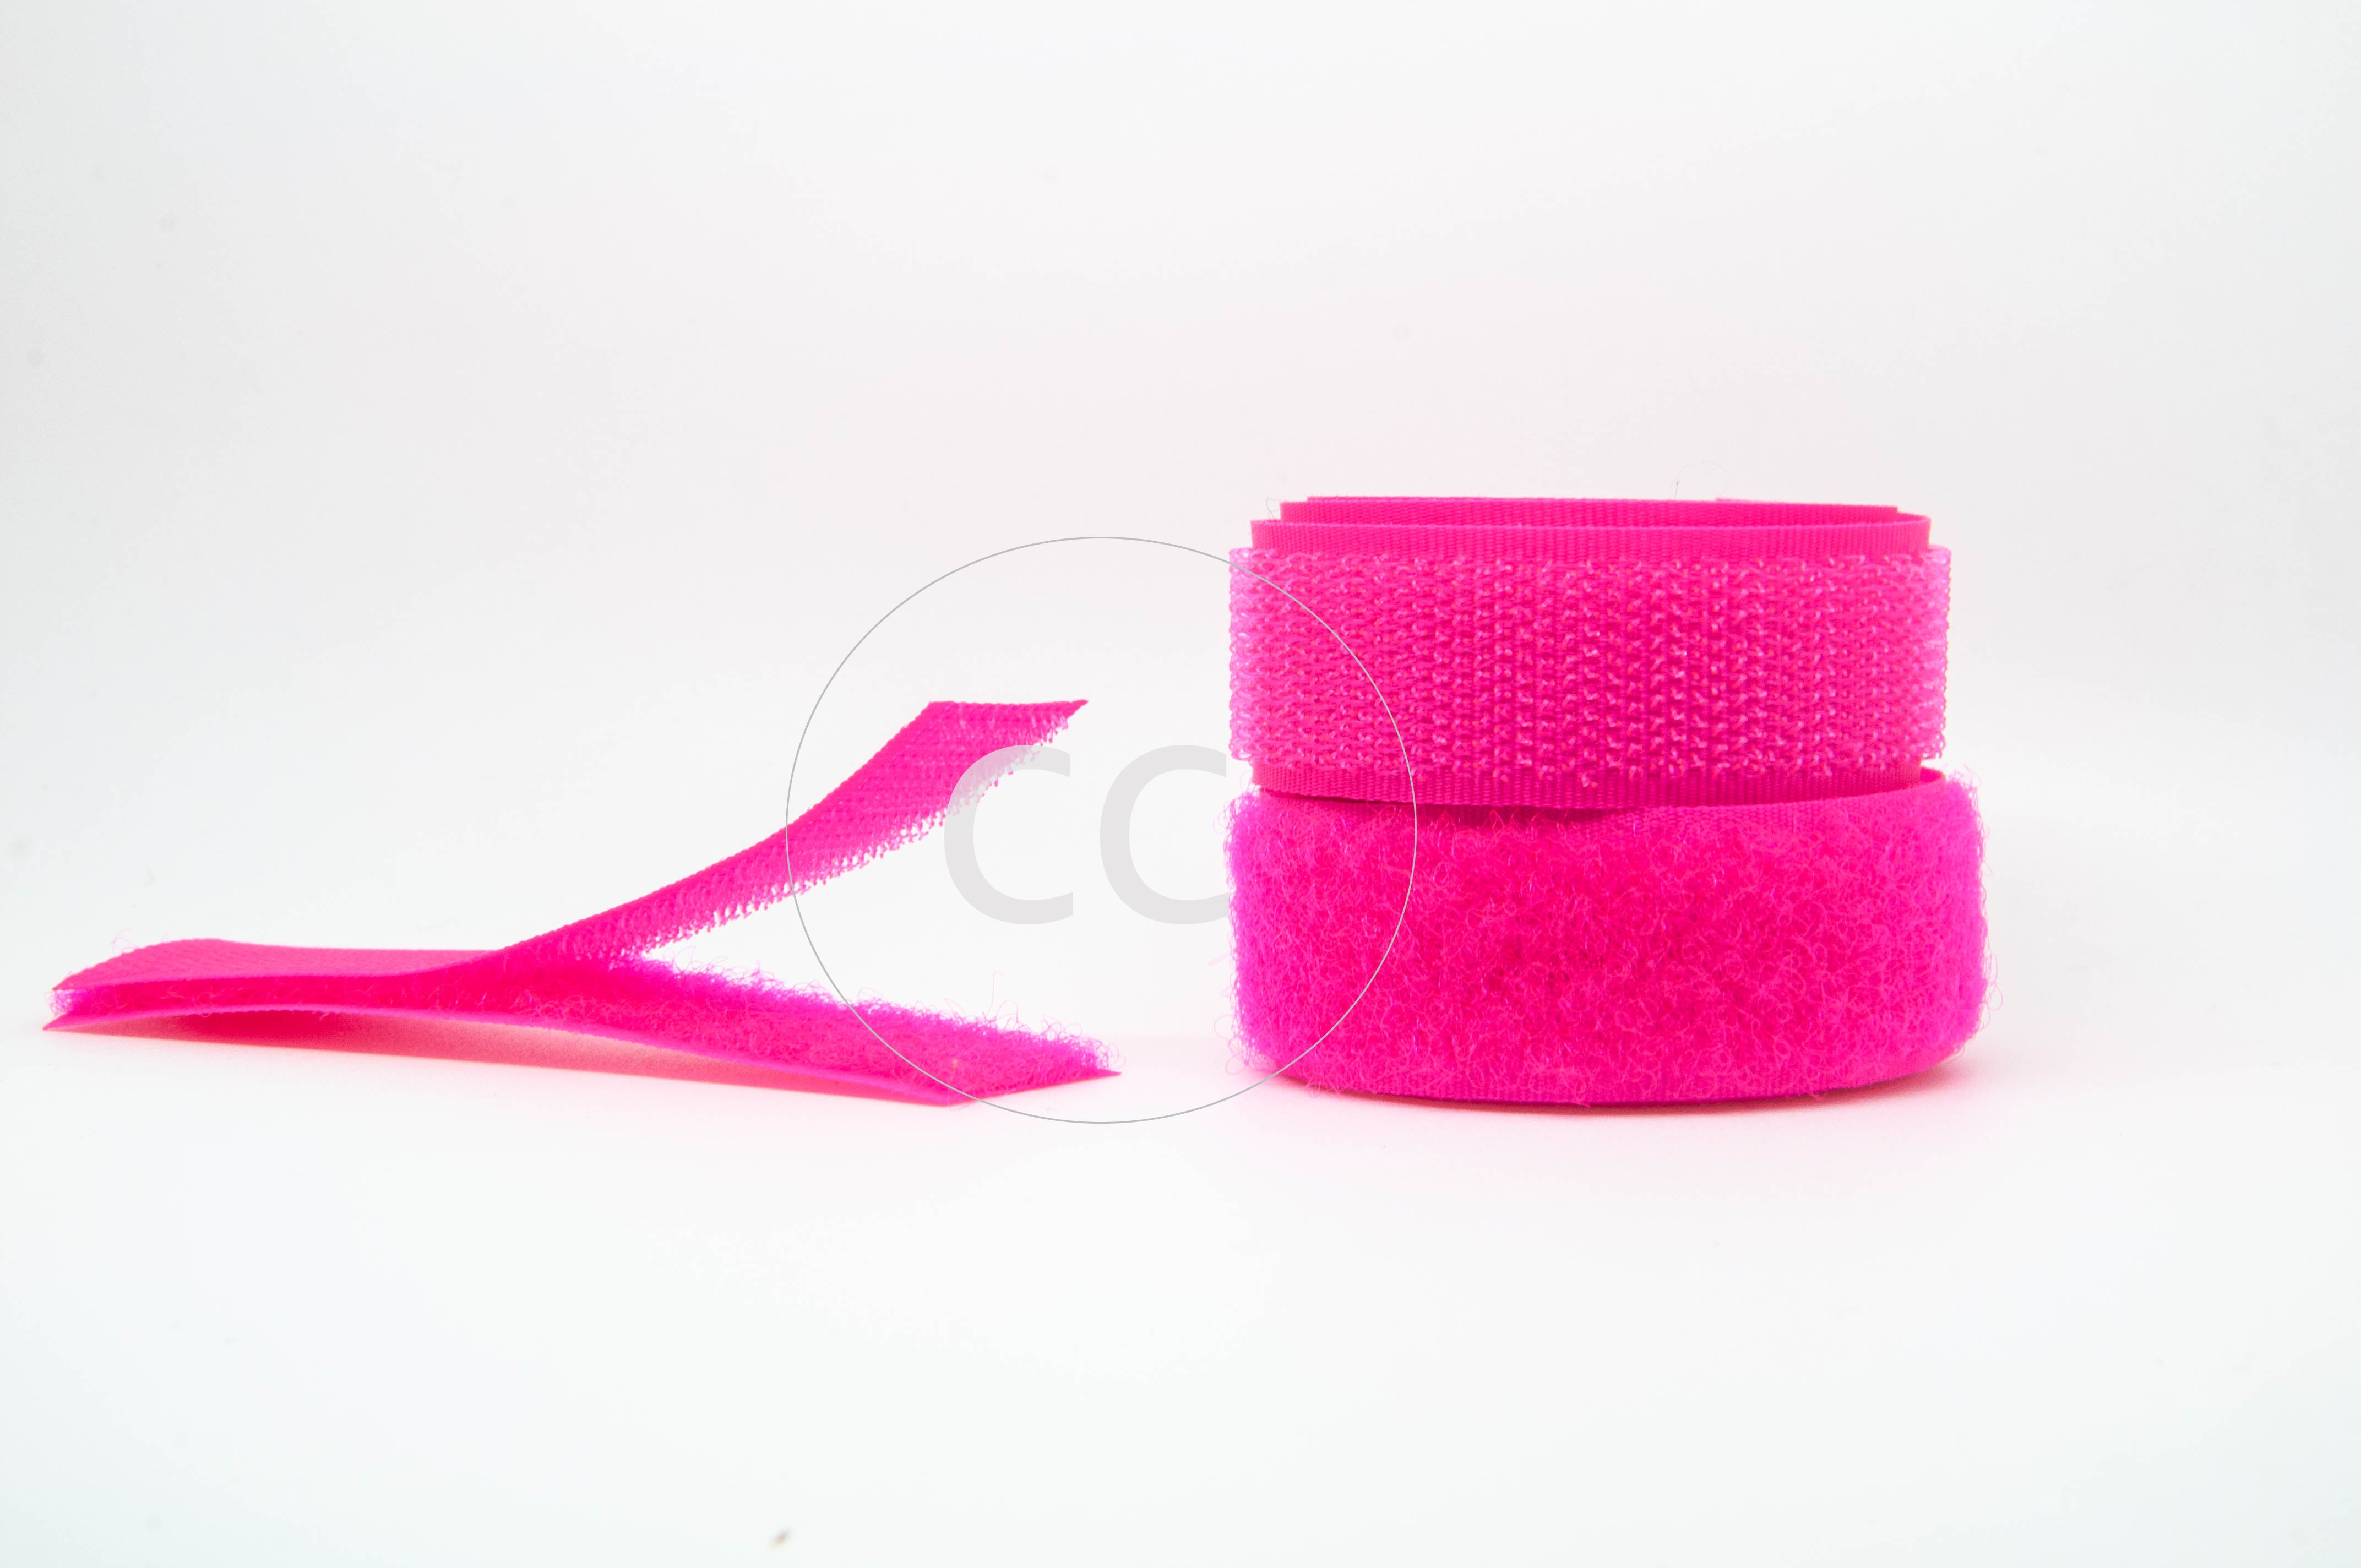 Flo Fushia Sew-on Hook & Loop tape Alfatex® Brand supplied by the Velcro Companies